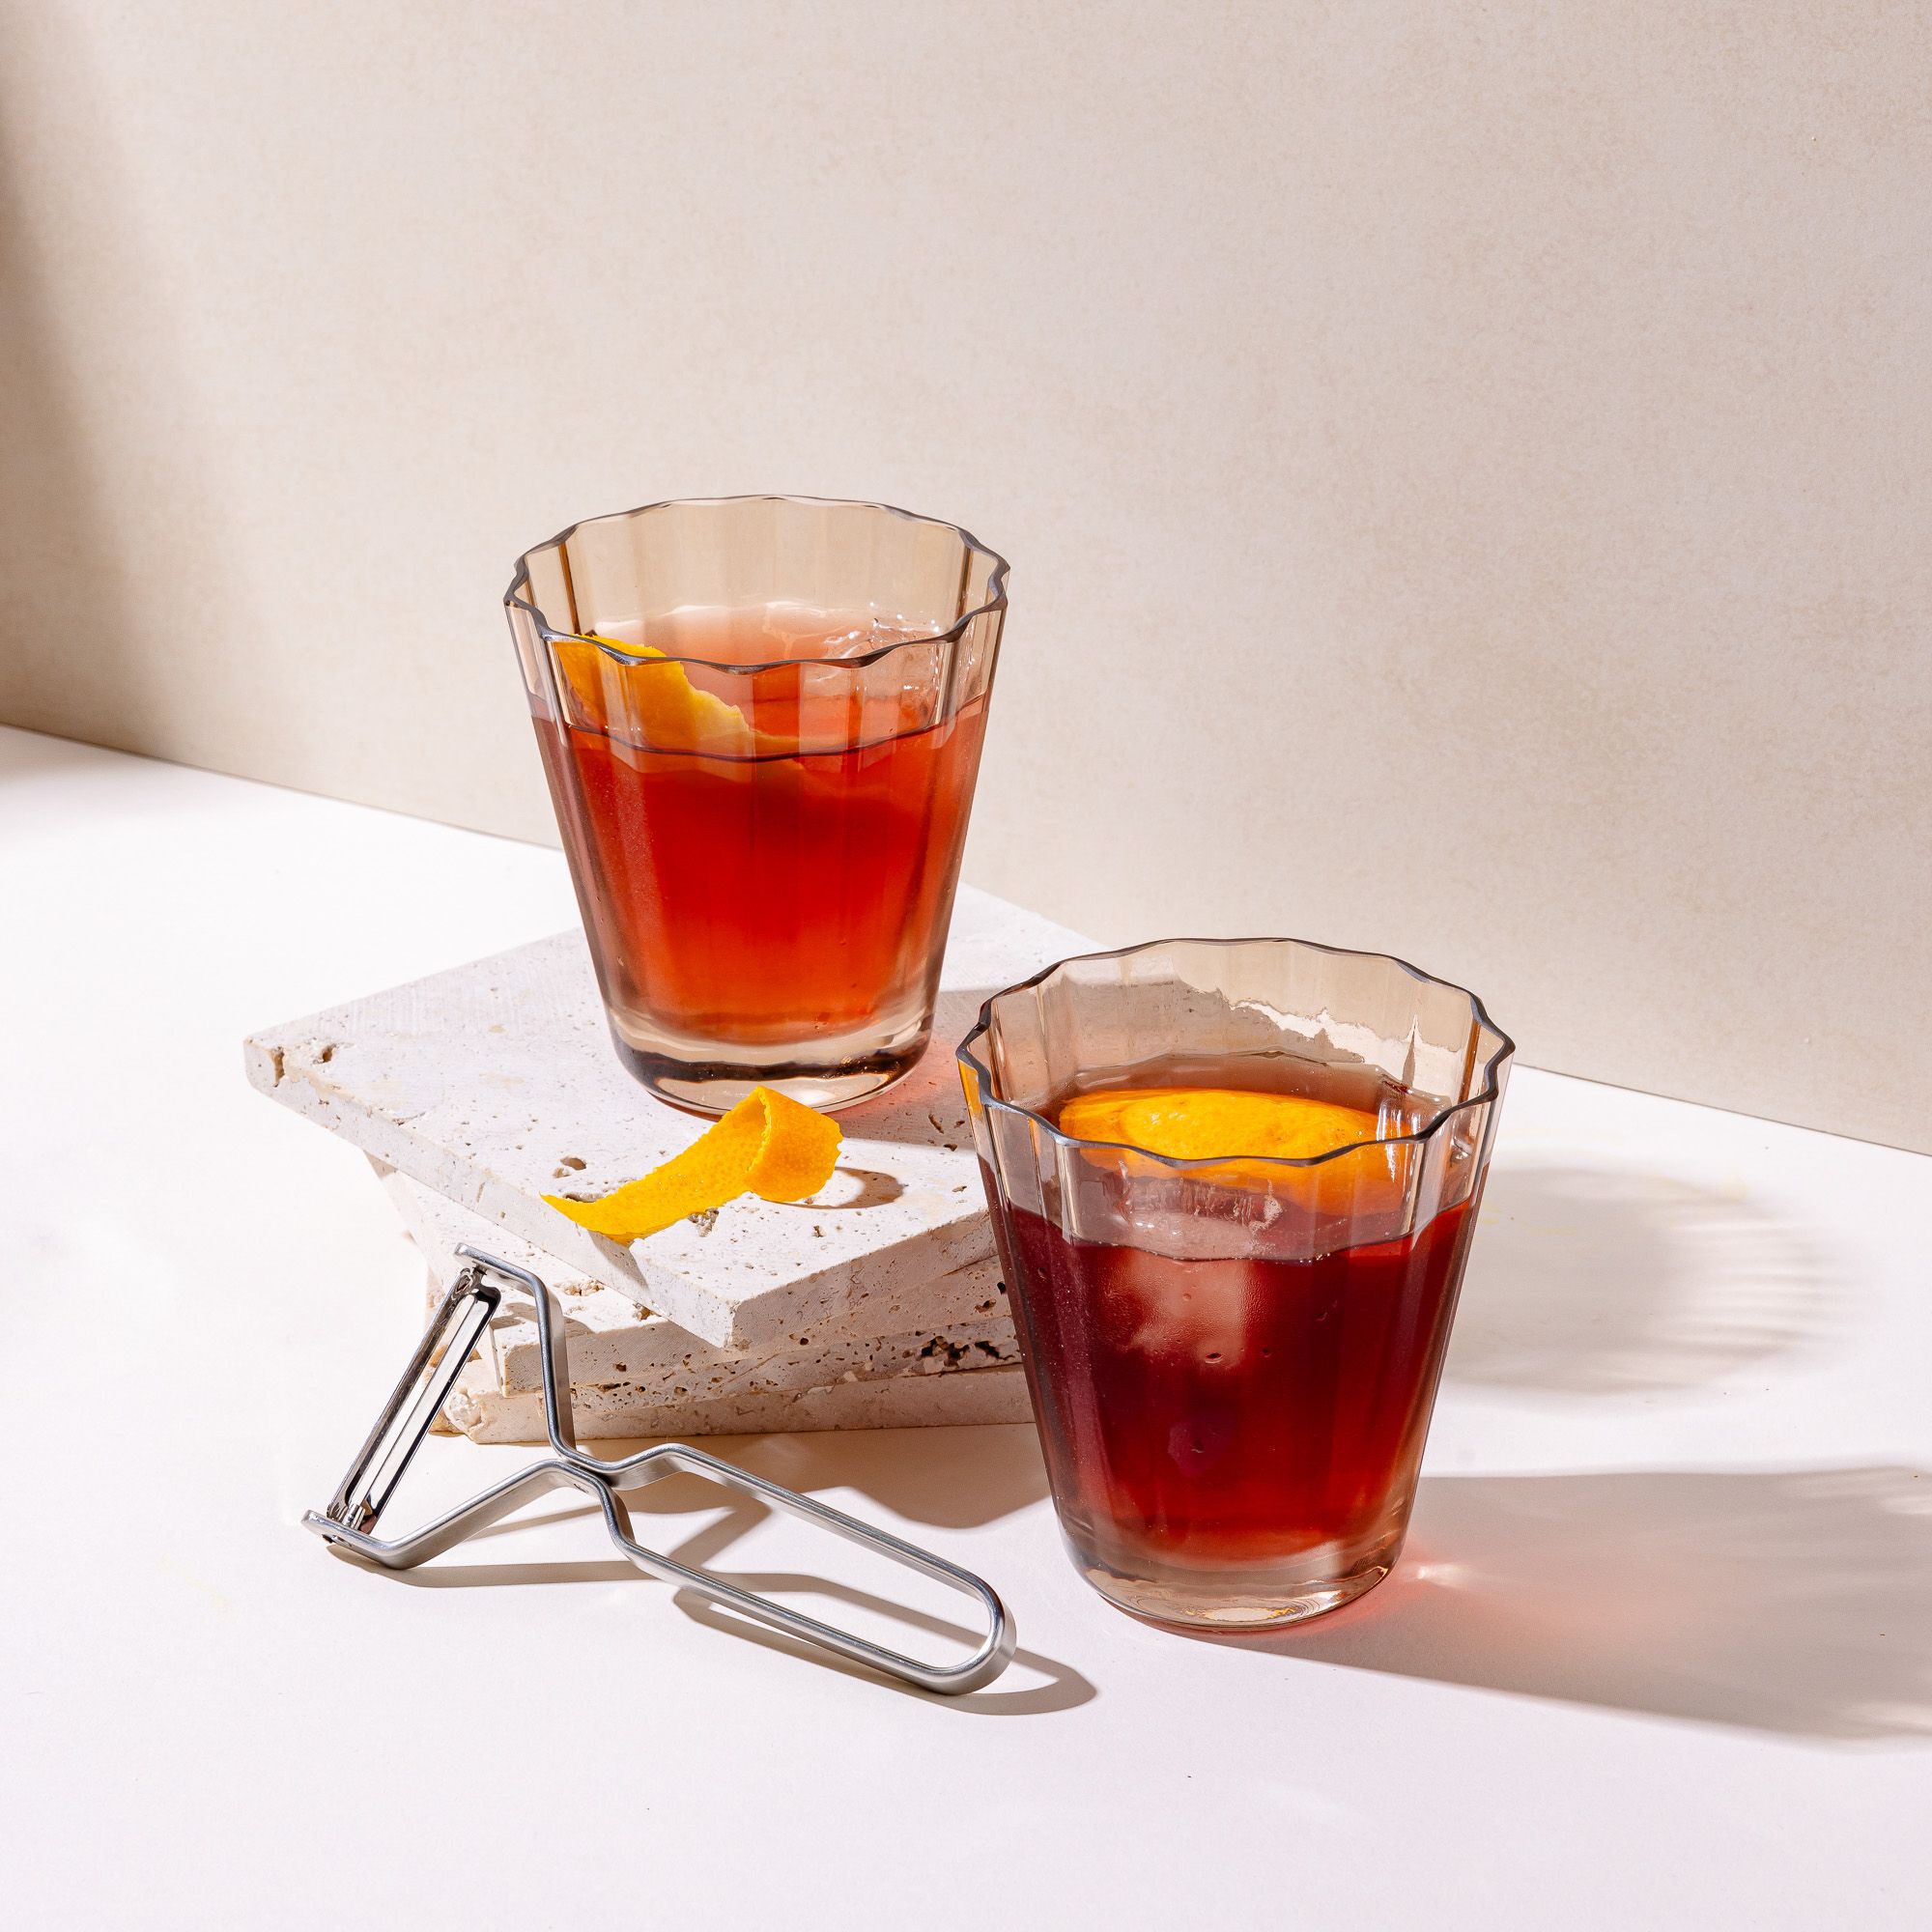 Styled two transparent light amber glasses with wide grooves on the side, filled with a cocktail and orange slice. Next to the glasses are a orange slice and stainless steel peeler.